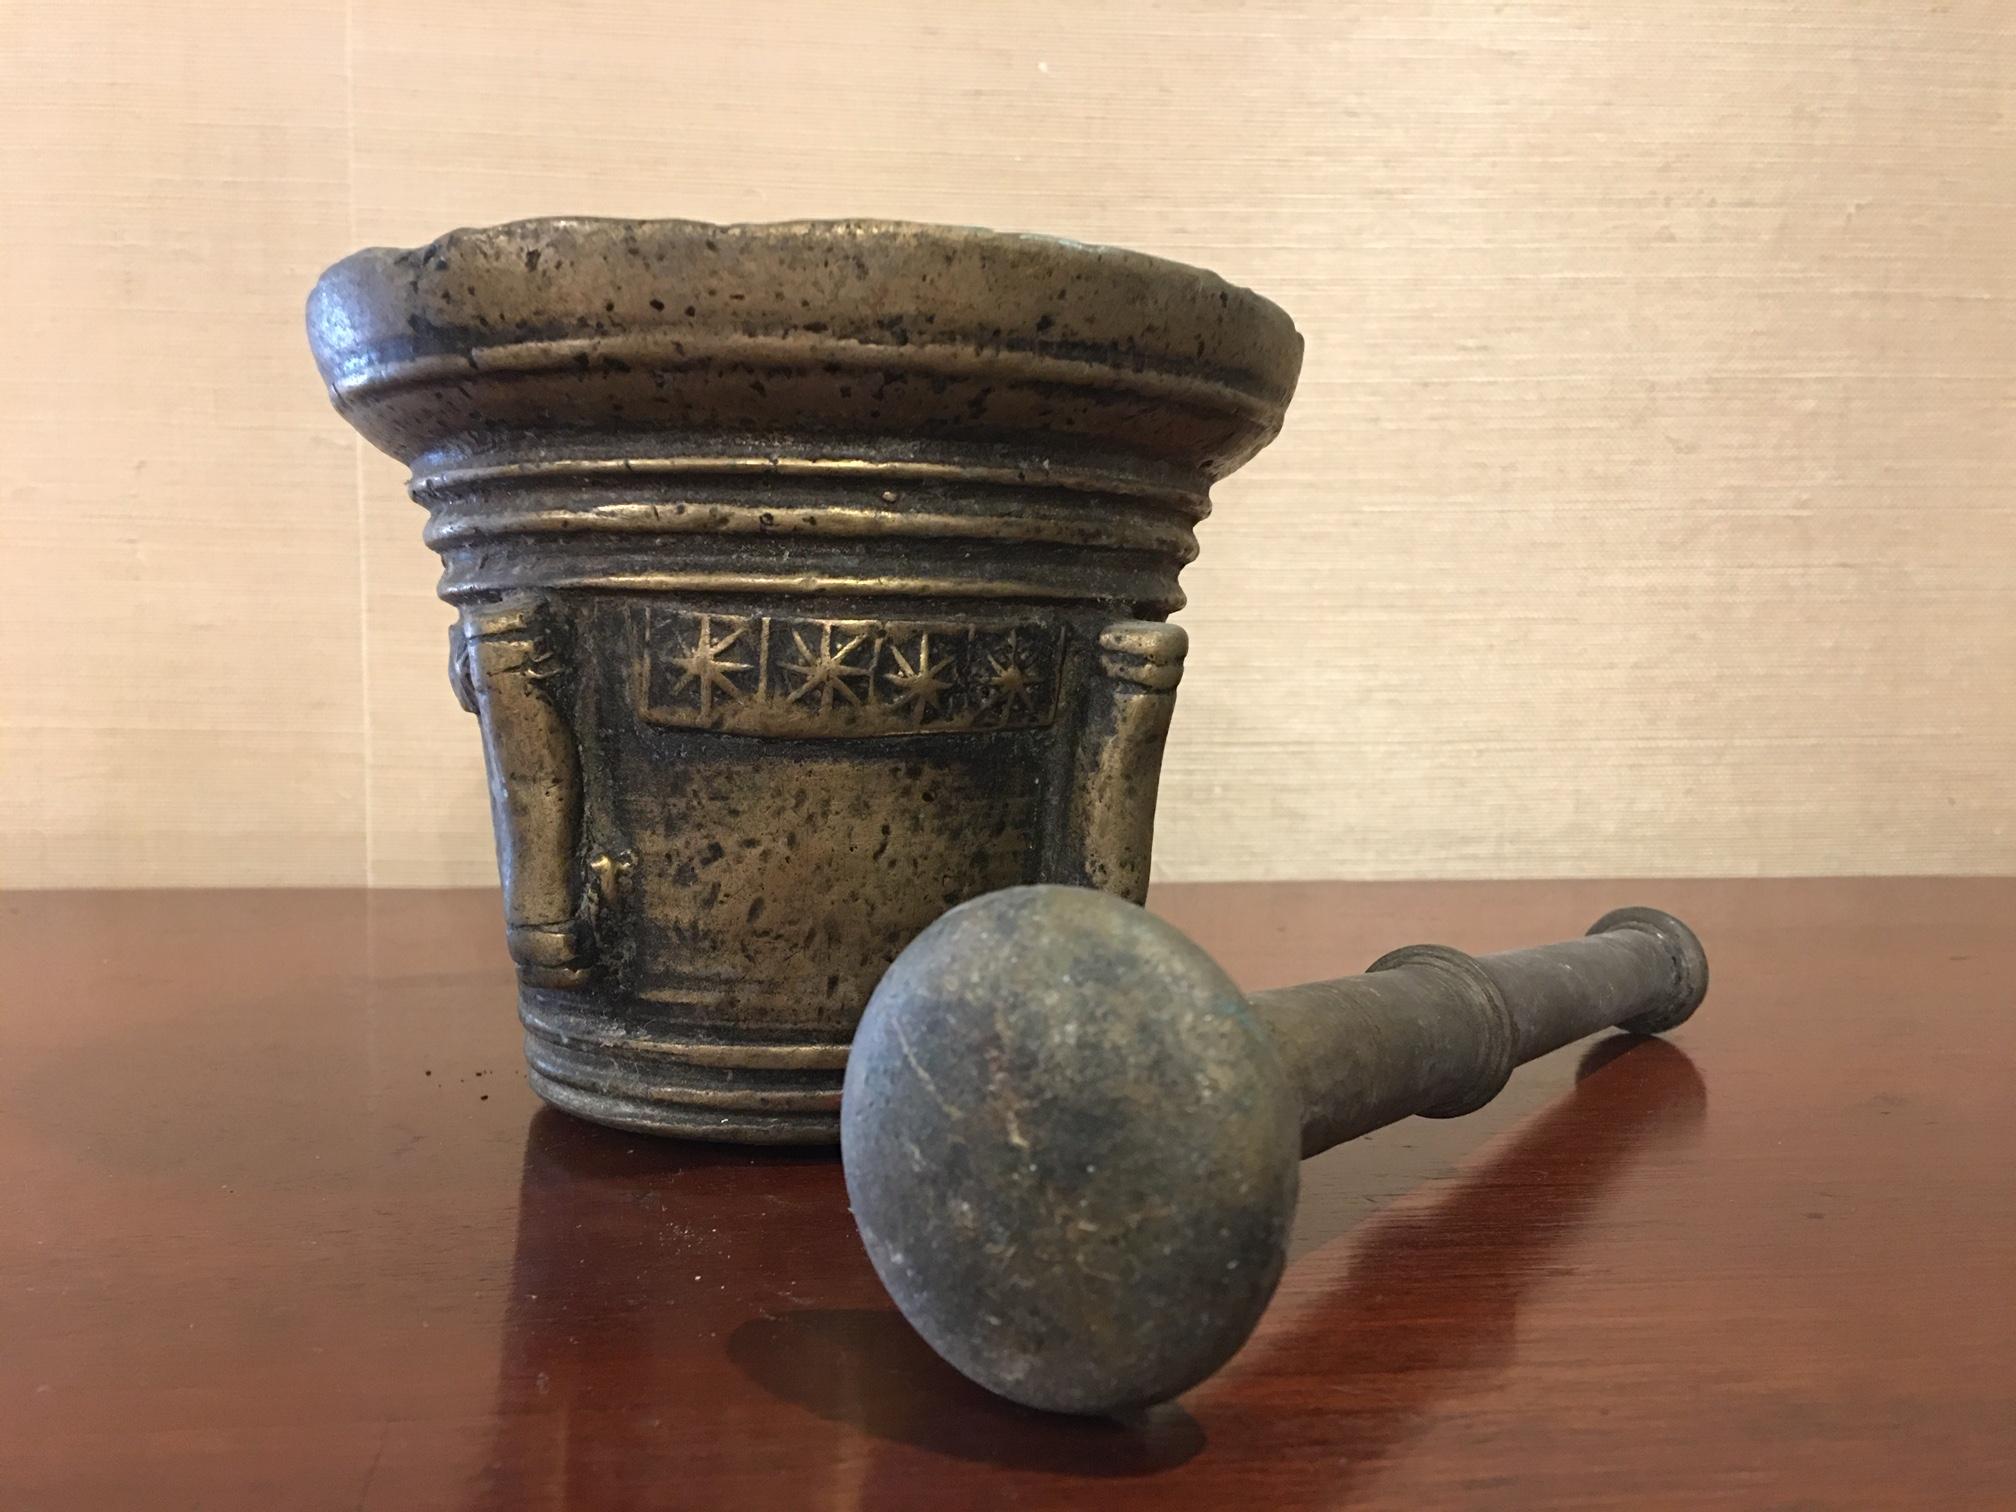 French bronze mortar and pestle, original Patina, early 19th century. Pharmacy or Herbalist antique bronze mortar. Handmade with pestle. Original patina.